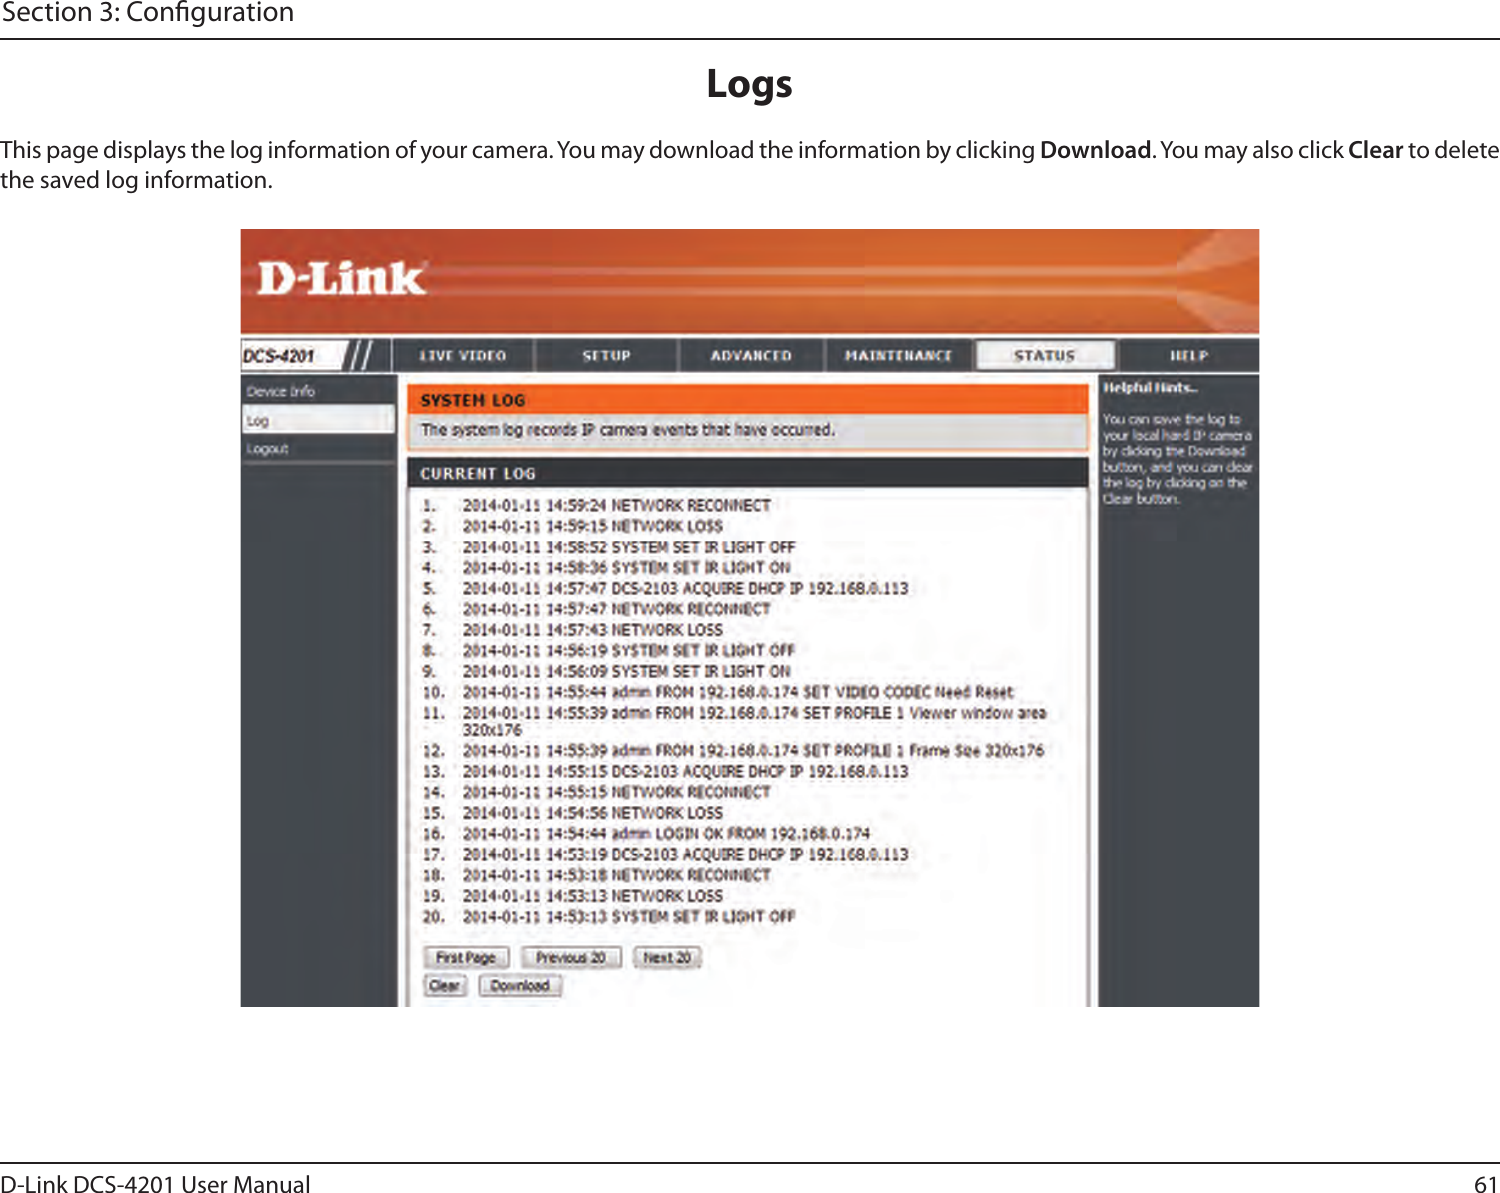 61D-Link DCS-4201 User ManualSection 3: CongurationThis page displays the log information of your camera. You may download the information by clicking Download. You may also click Clear to delete the saved log information.Logs